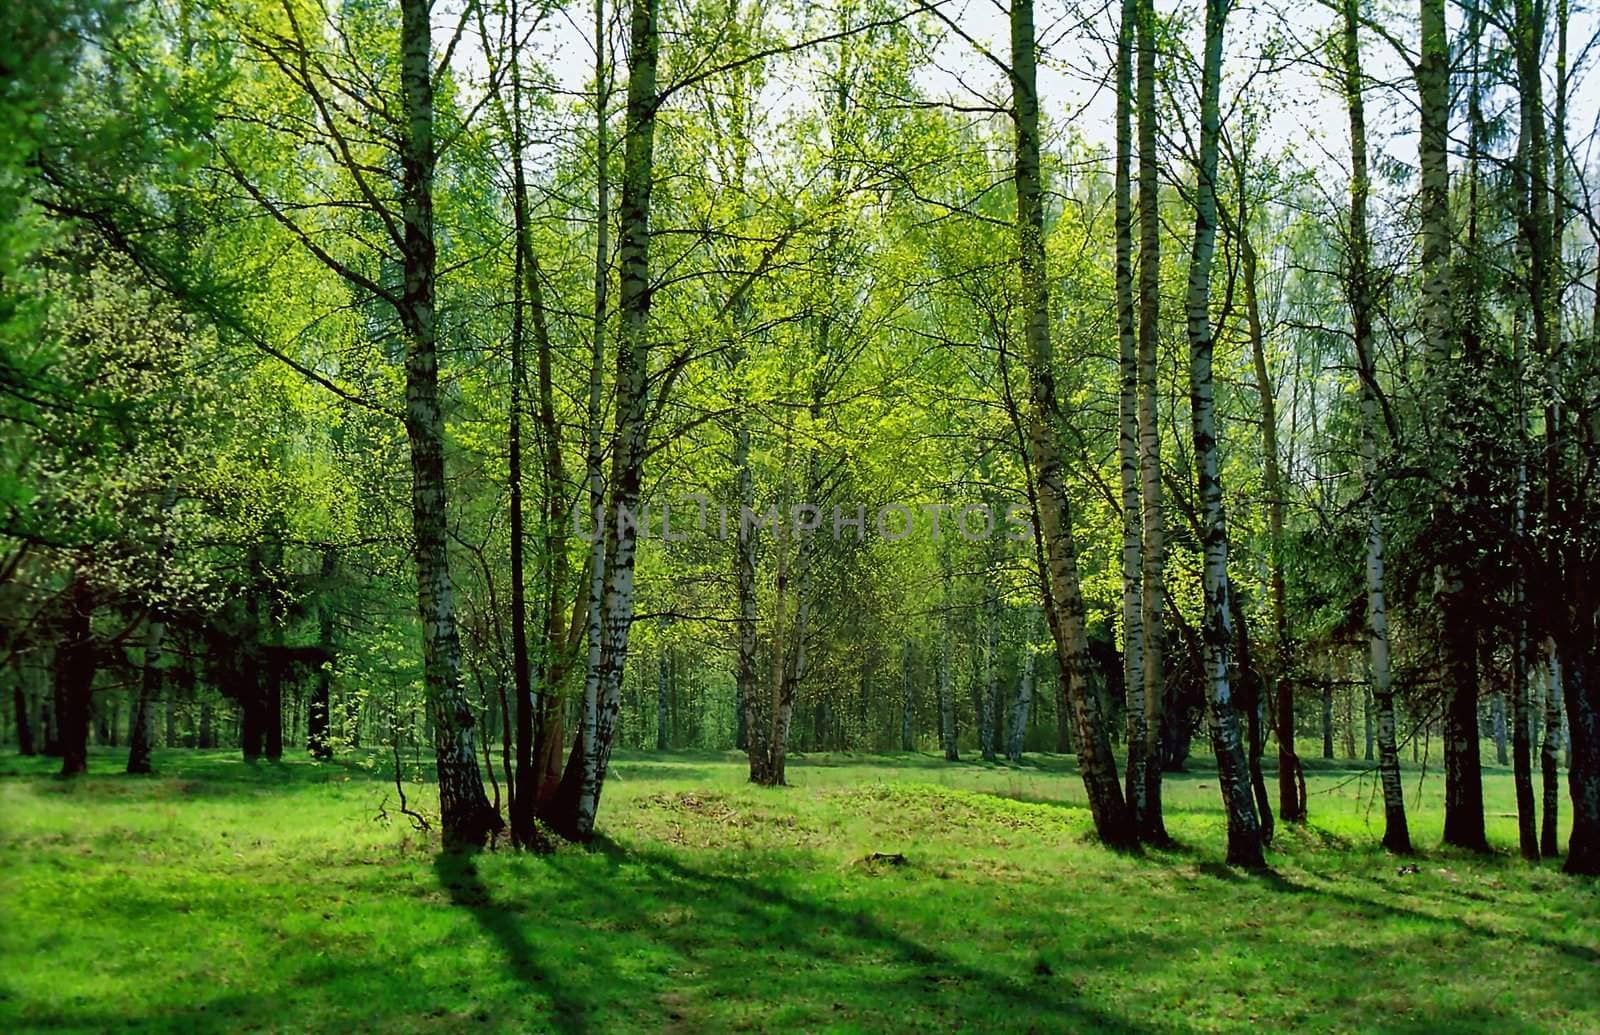 Birches in back projection in Spring